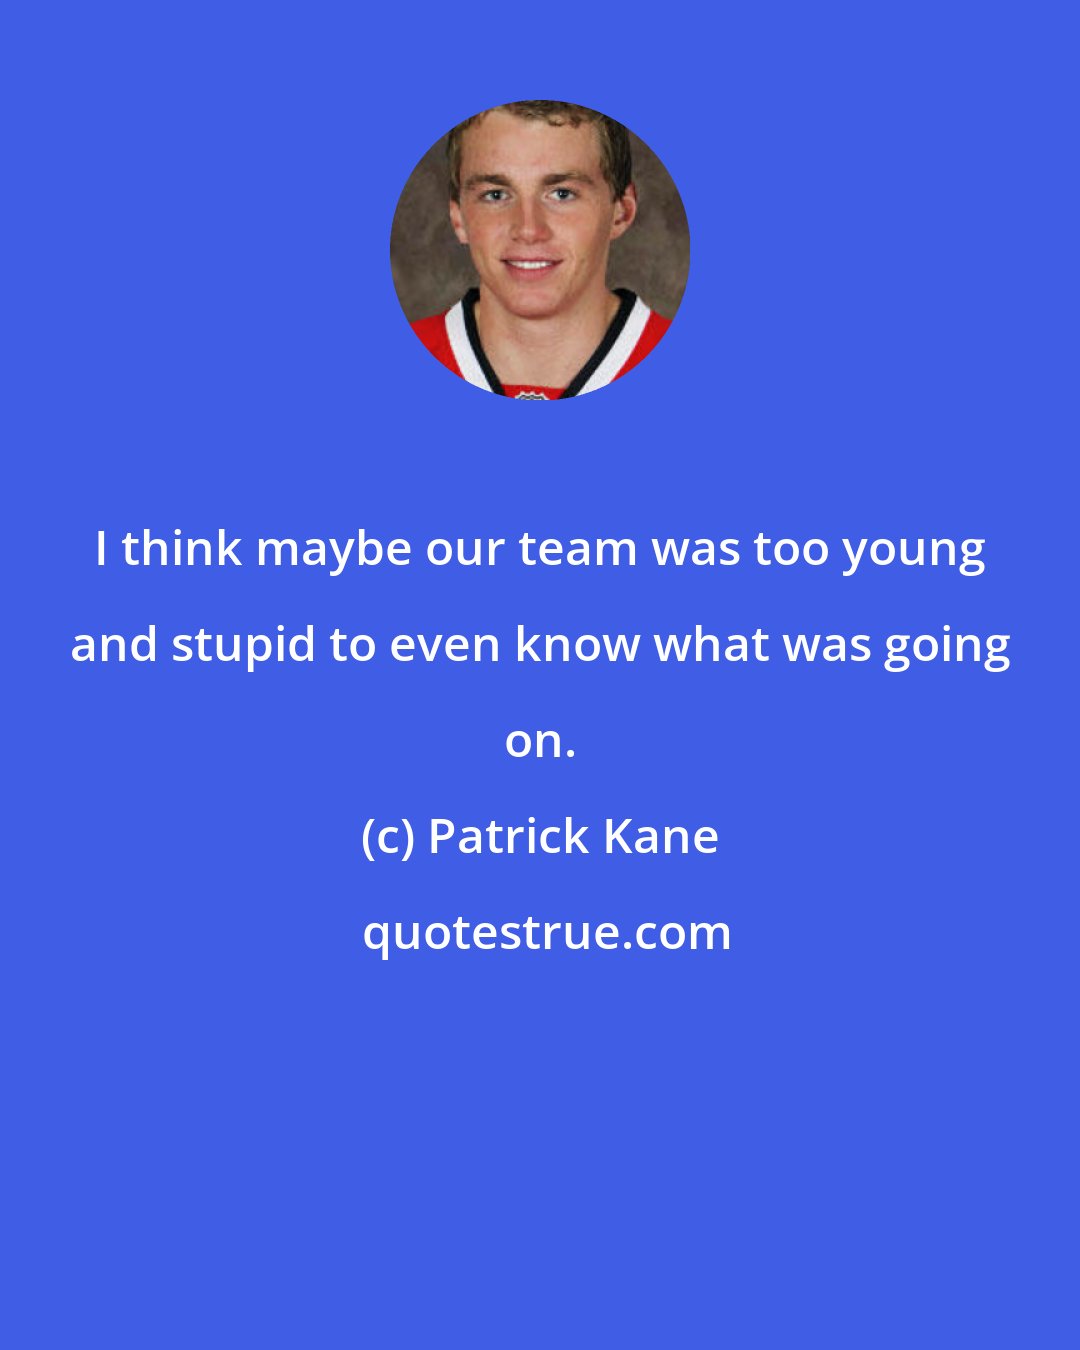 Patrick Kane: I think maybe our team was too young and stupid to even know what was going on.